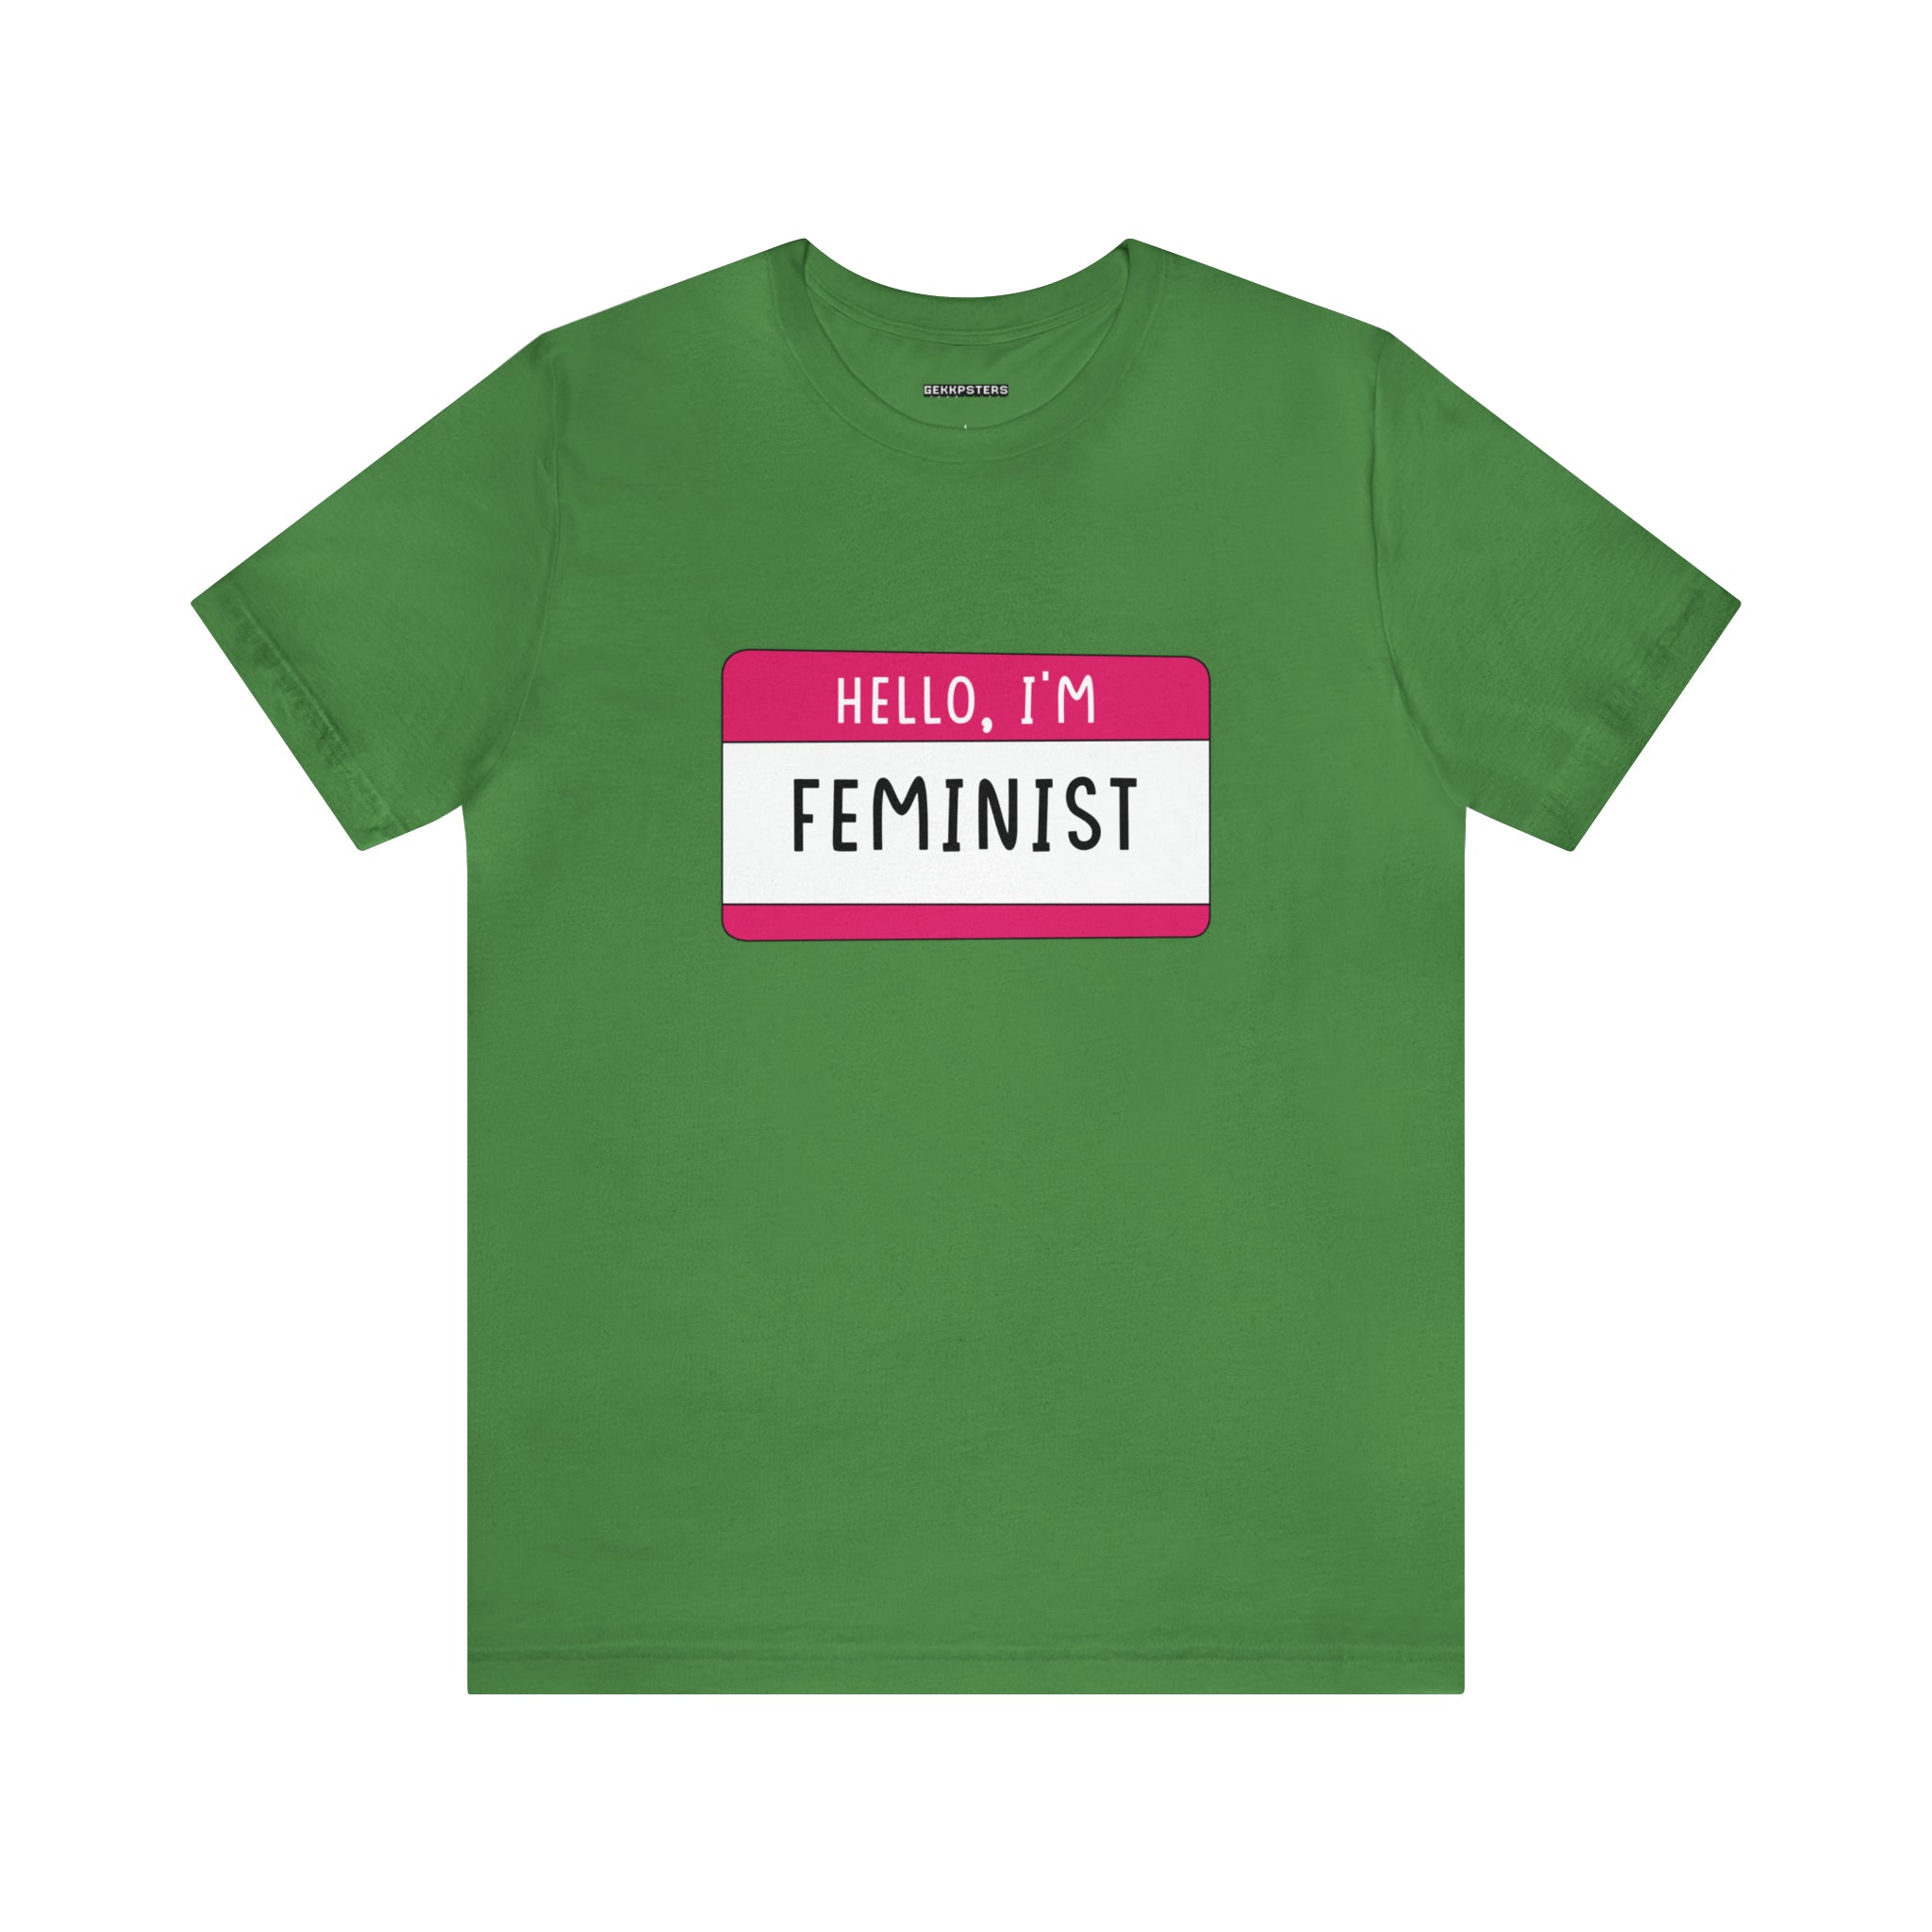 Green Hello, I'm Feminist T-Shirt with a pink name tag graphic saying "hello, I'm feminist" in white text, embodying equality.